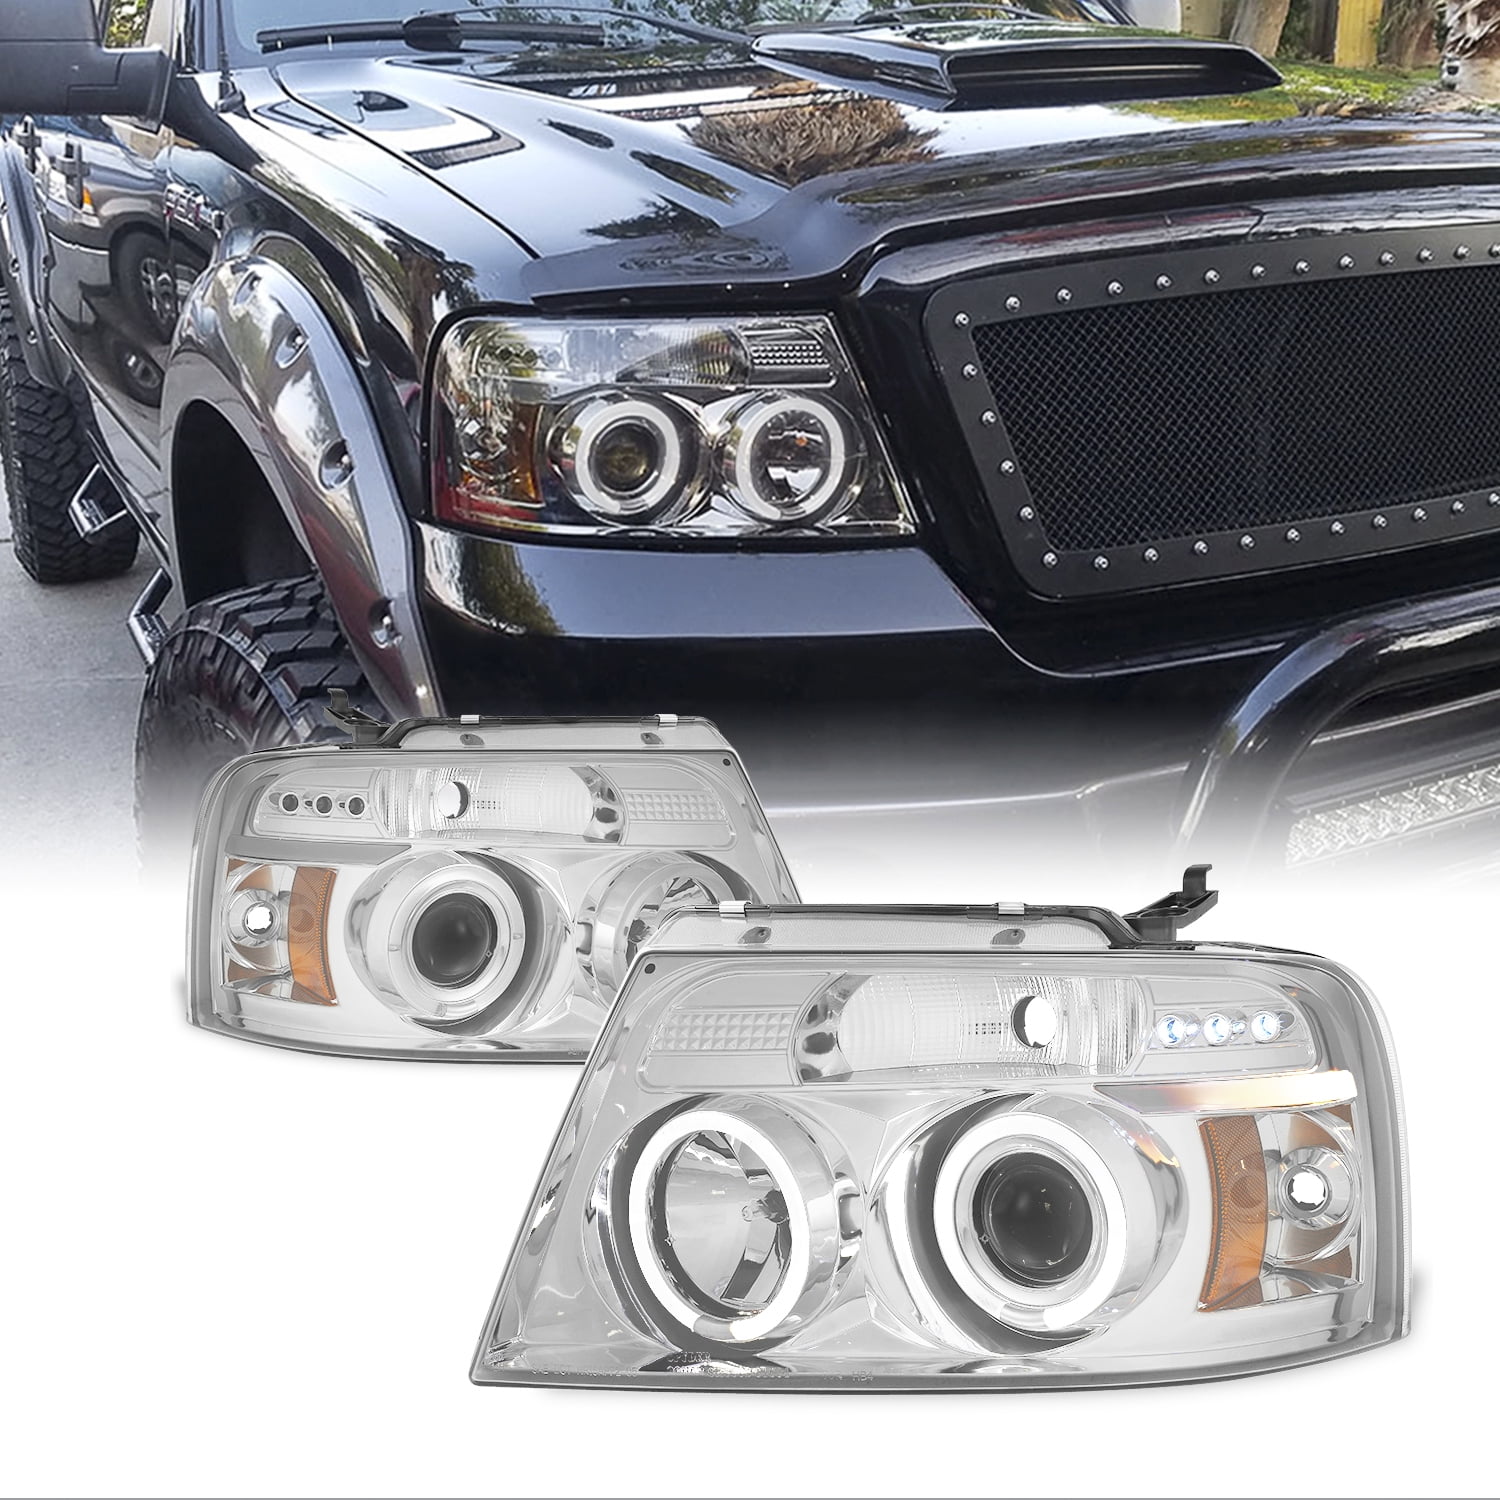 Headlights Headlamps Left & Right Pair Set NEW for Ford F-Series Pickup Truck